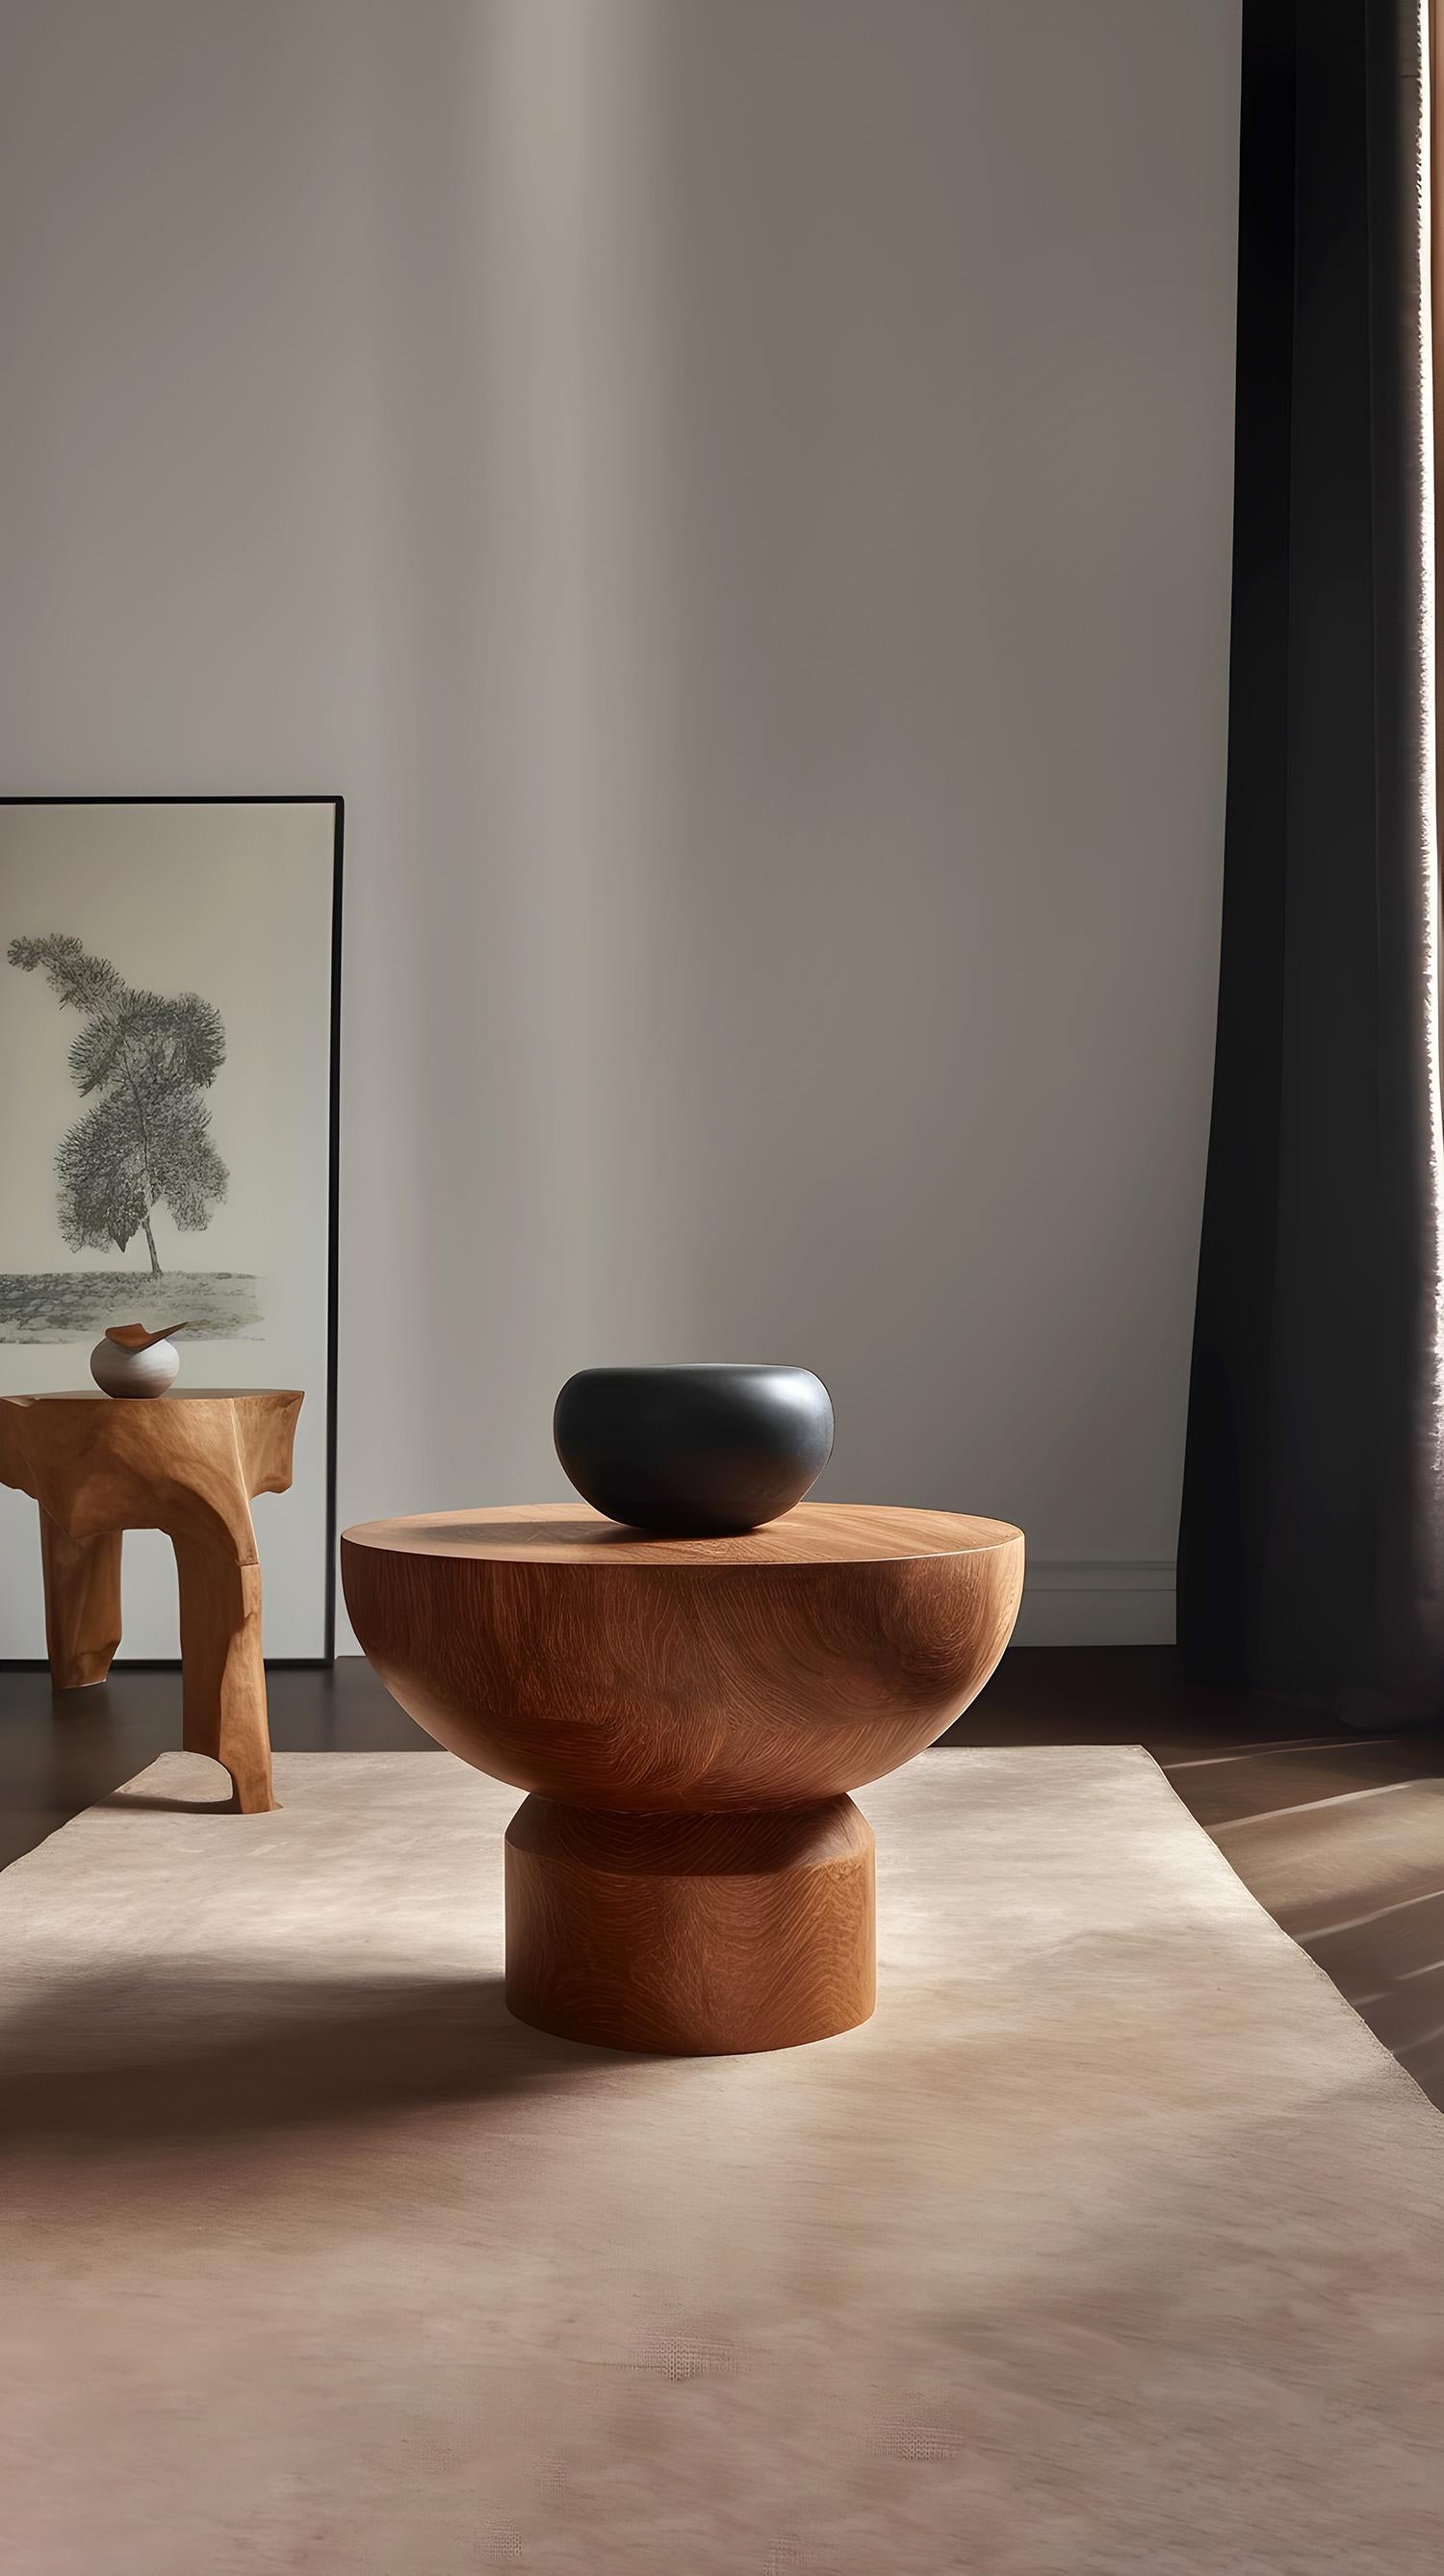 Socle side table, auxiliary table, night stand

Socle is a small solid wood table designed by the NONO design team. Made of solid wood, its elaborated construction serves as a support, much like a plinth for a statue or sculpture.

In the past,